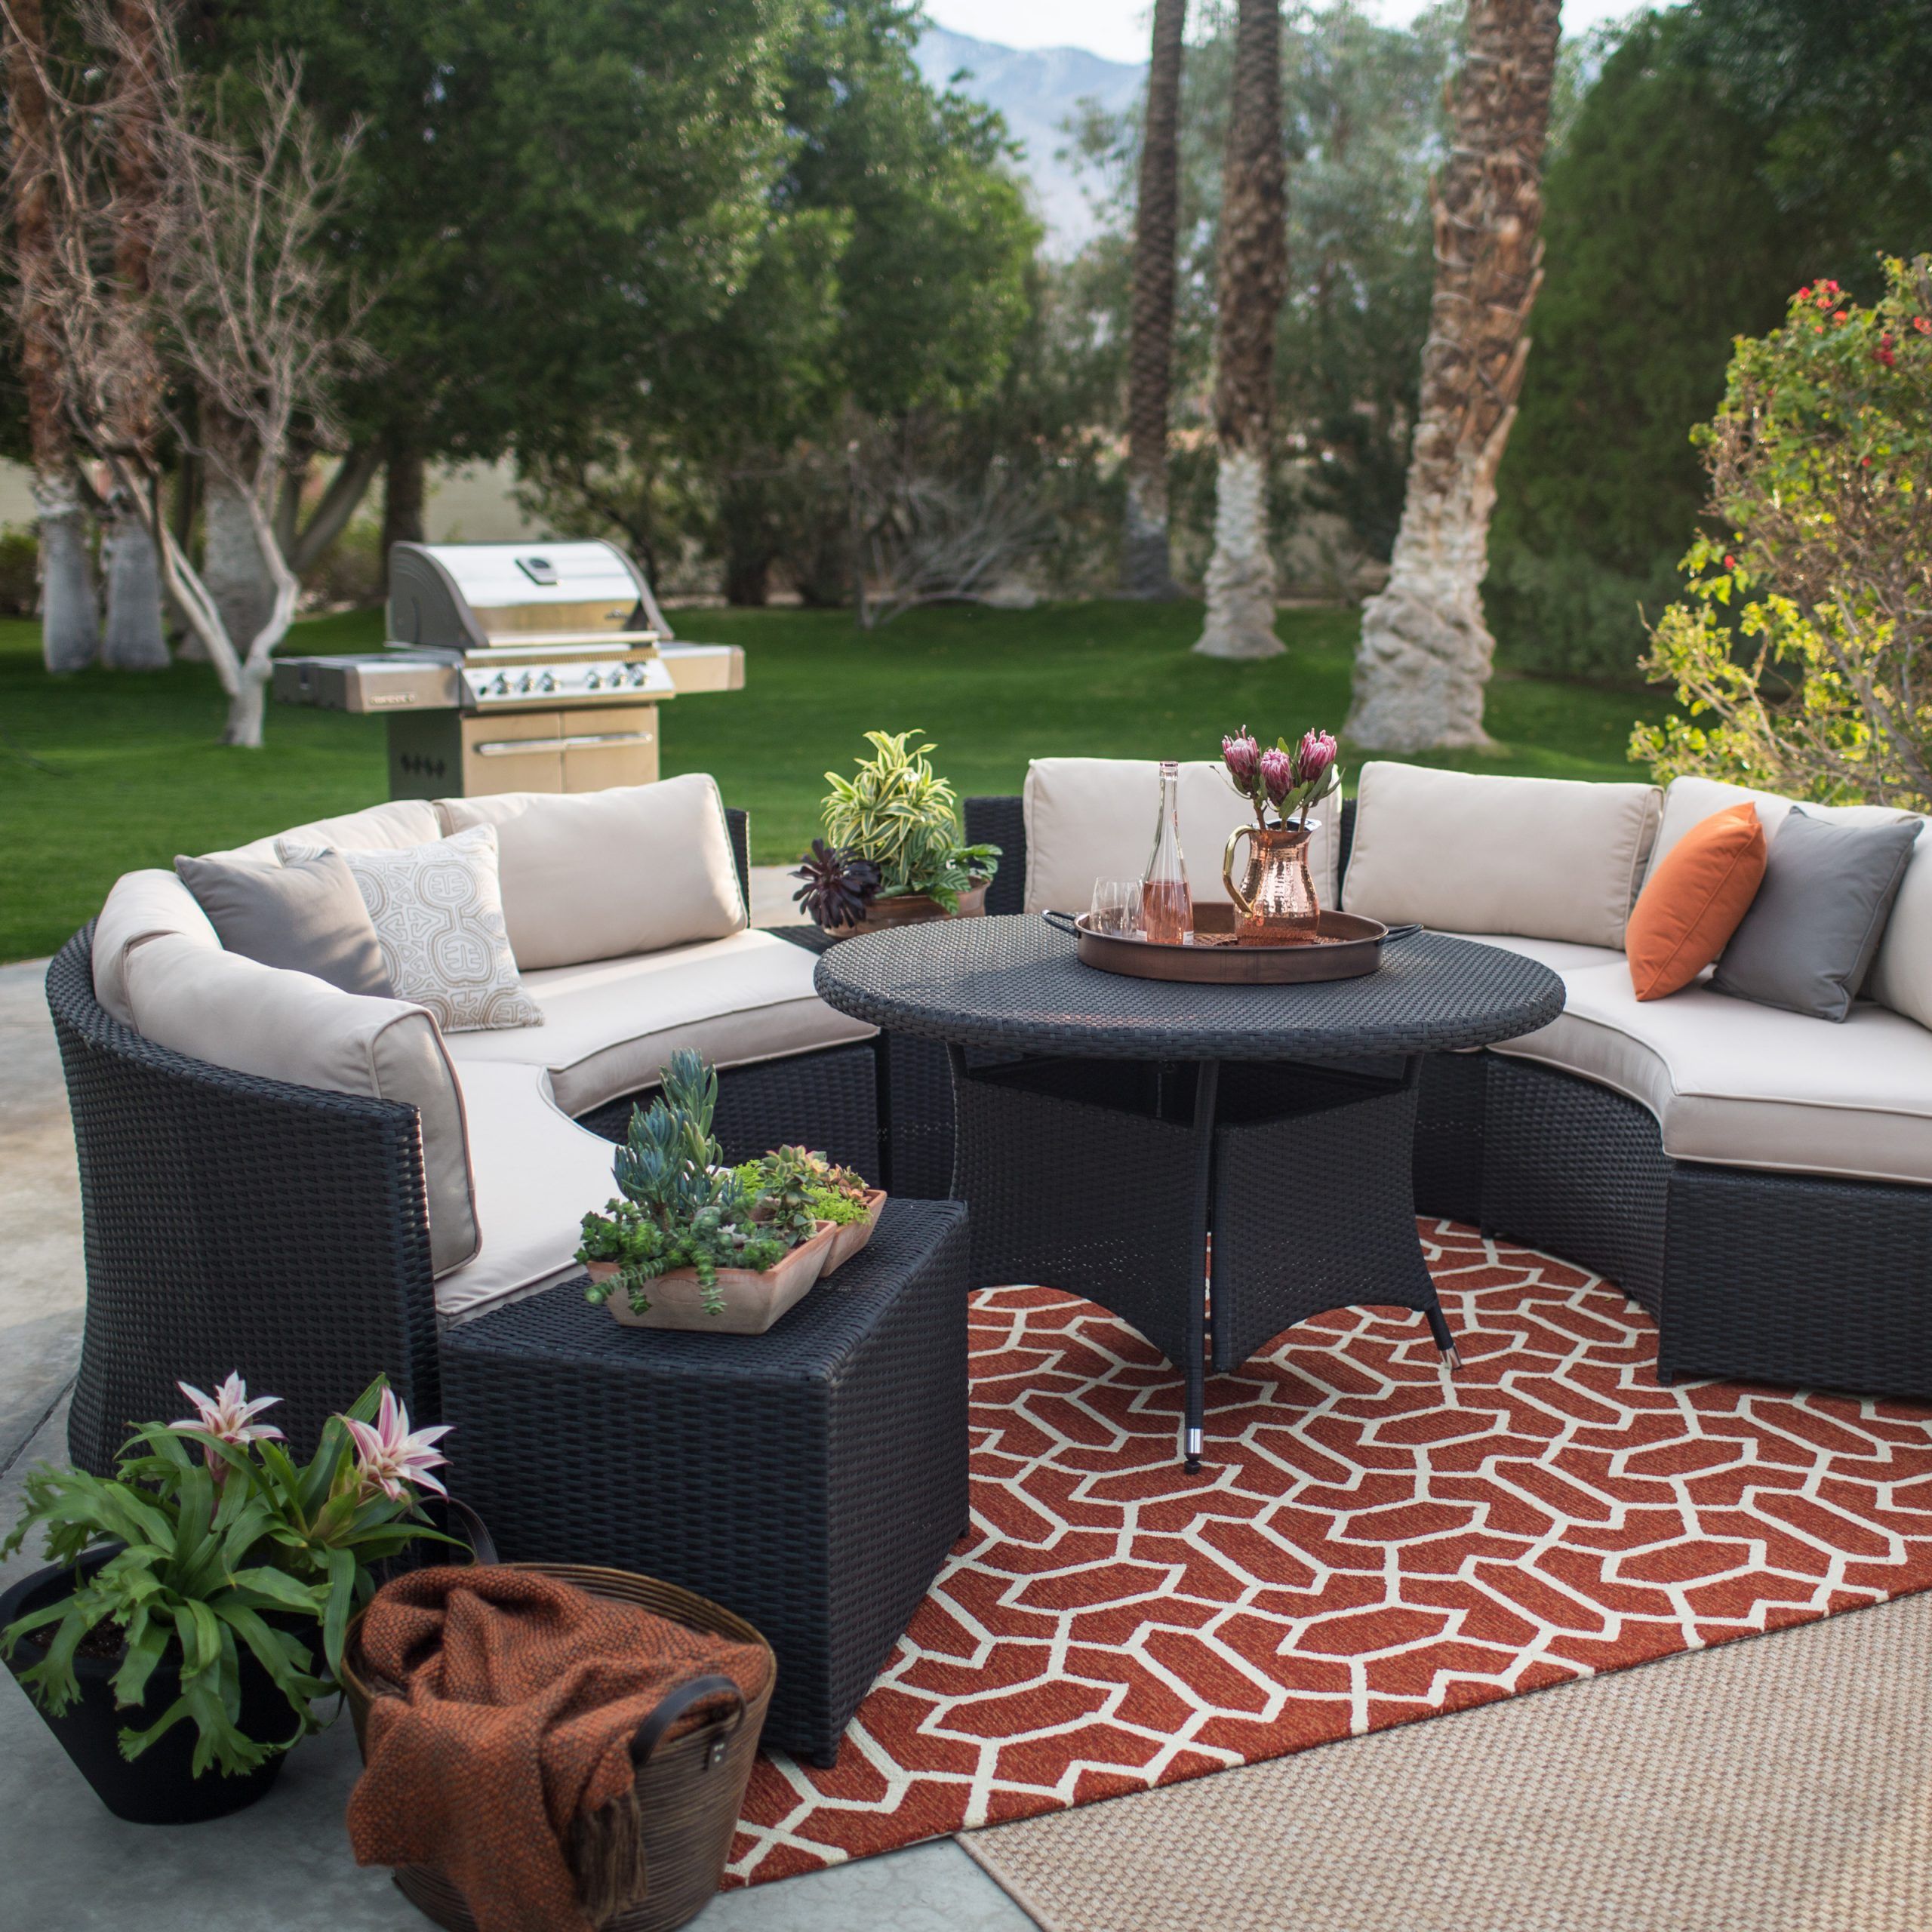 2019 Belham Living Meridian 5 Piece All Weather Wicker Sofa Sectional Patio For Outdoor Seating Sectional Patio Sets (View 10 of 15)